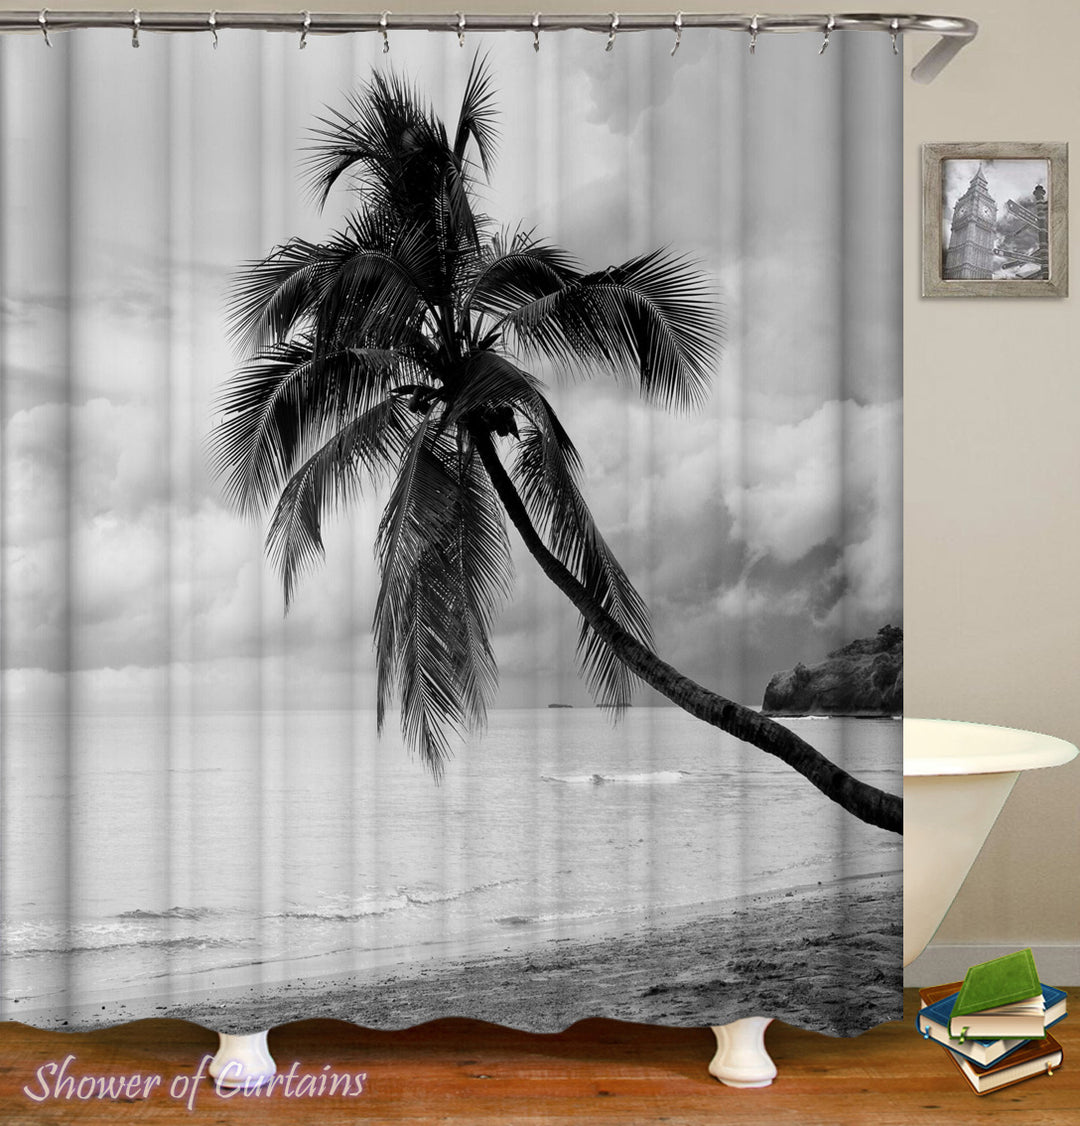 Black And White Coconut Tree shower curtain